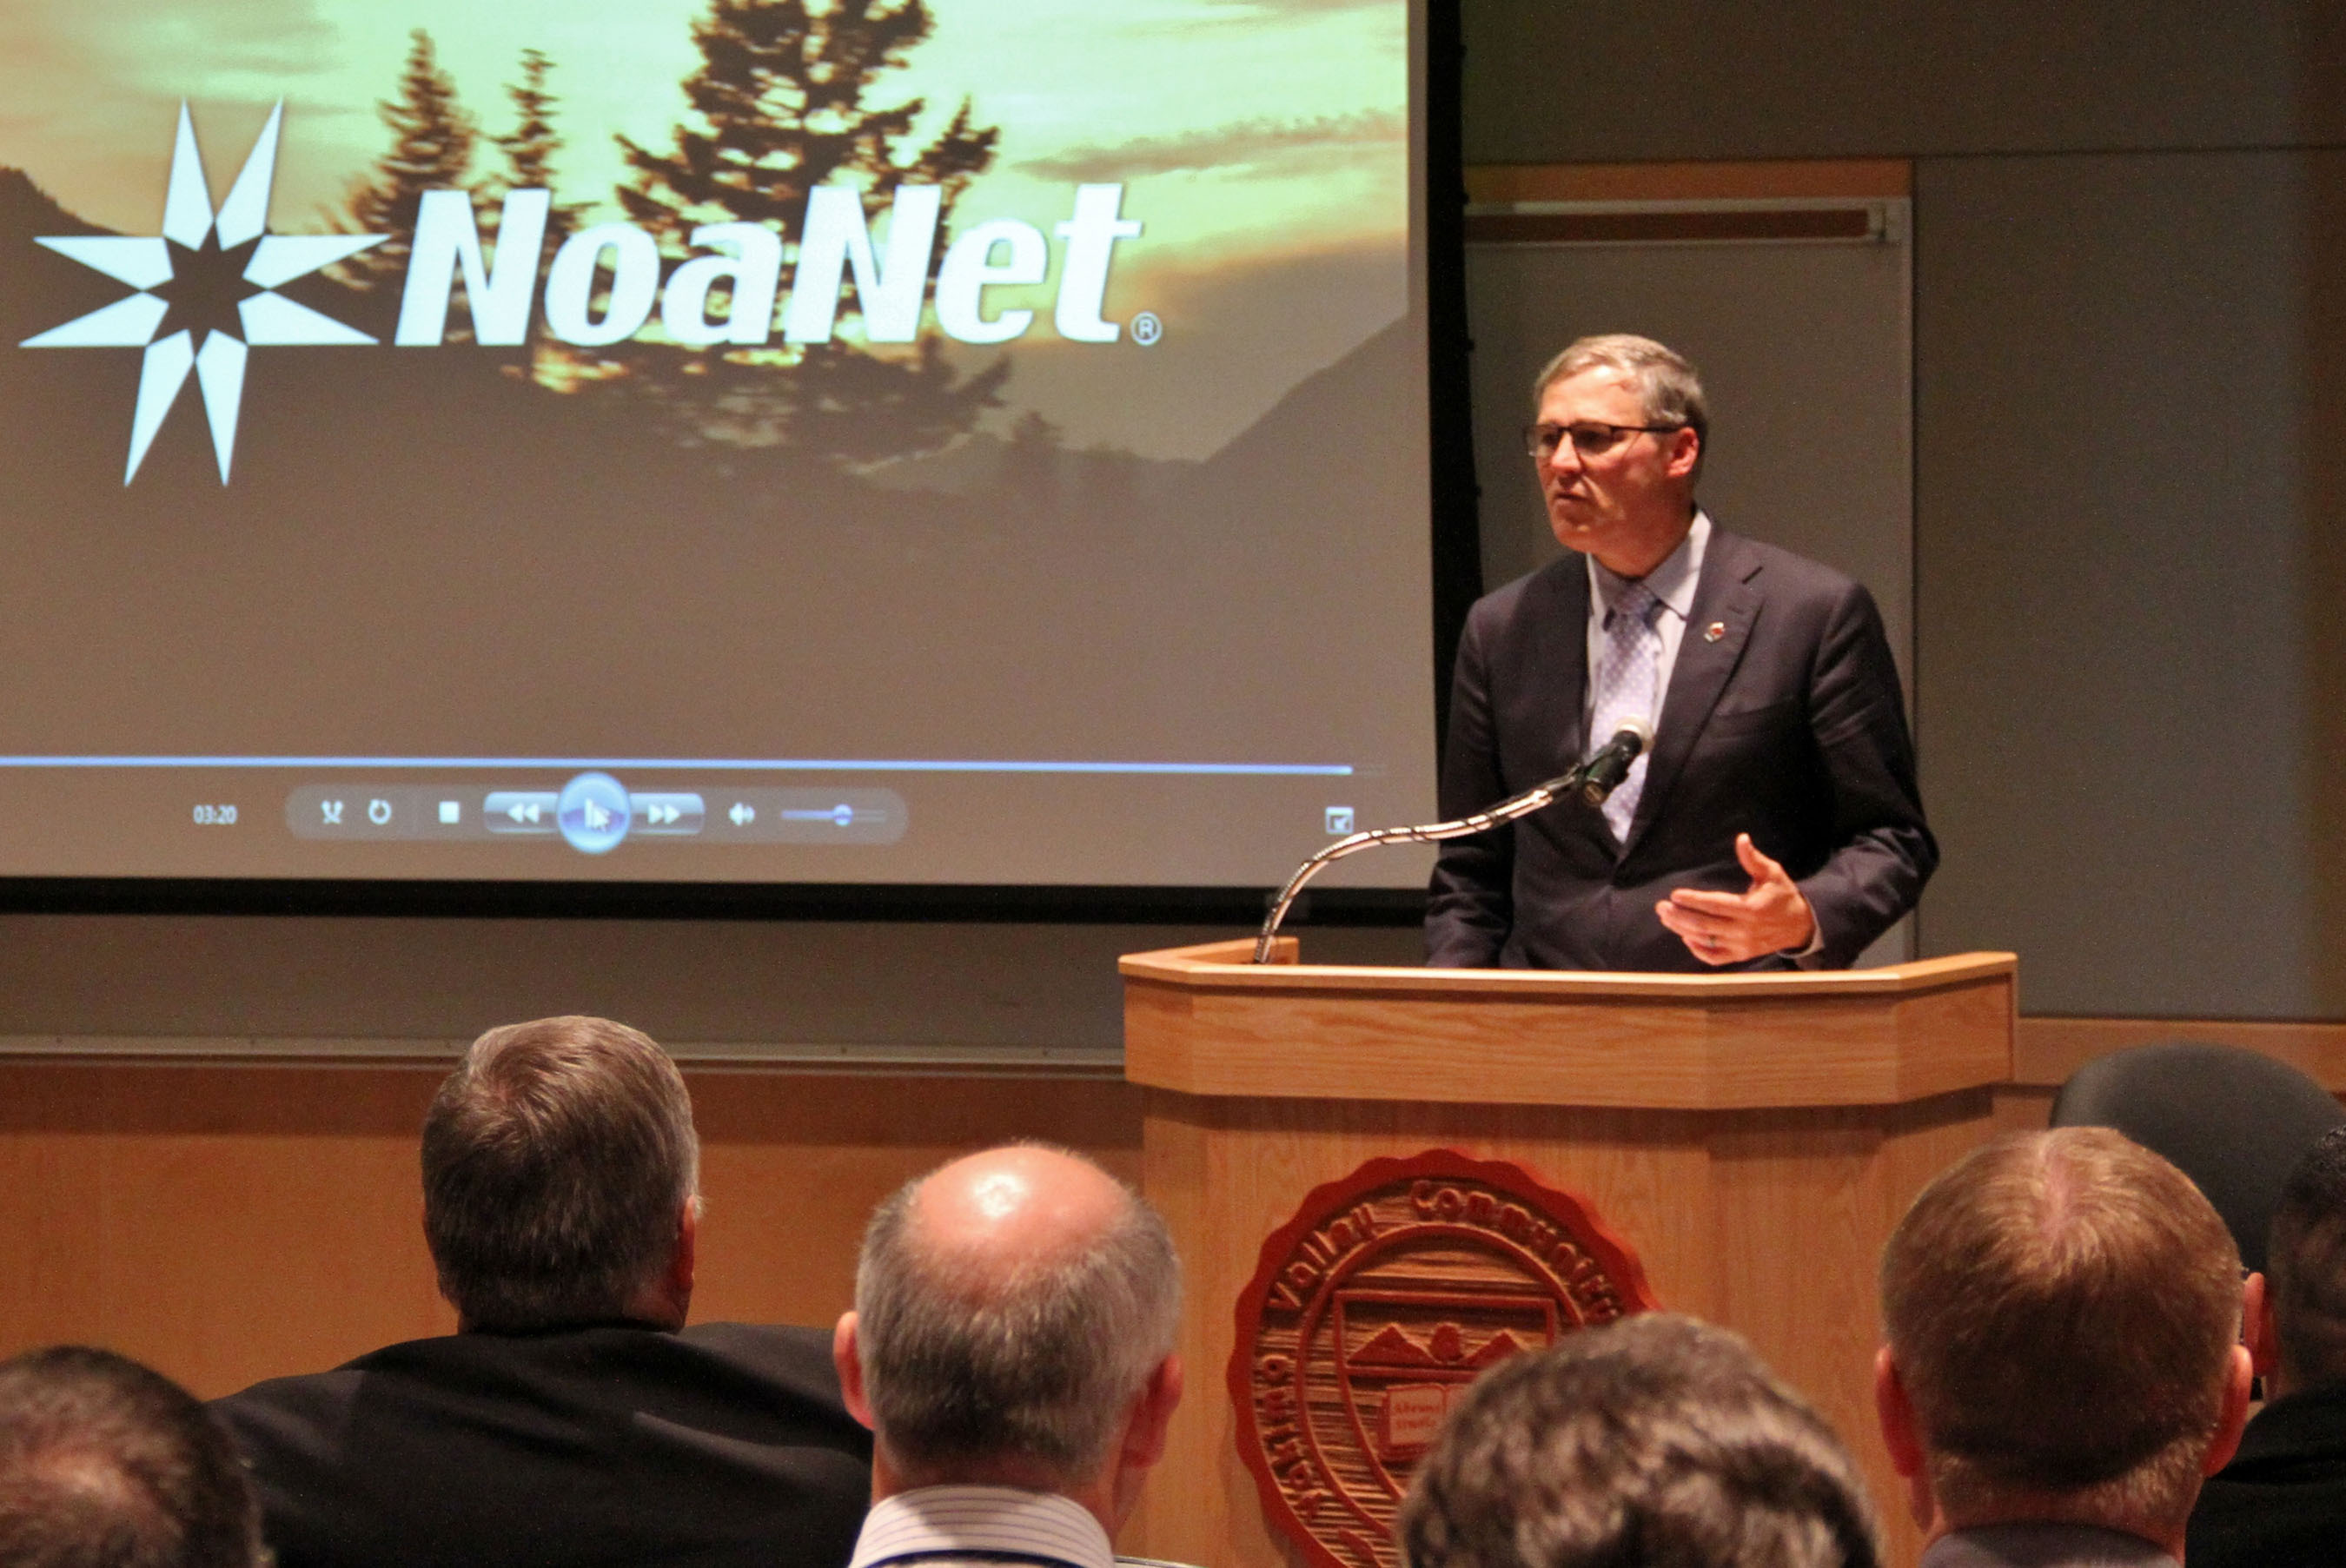 Washington Governor Jay Inslee celebrates the completion of NoaNet's open access broadband fiber network at Yakima Valley Community College. (PRNewsFoto/NoaNet) (PRNewsFoto/NOANET)